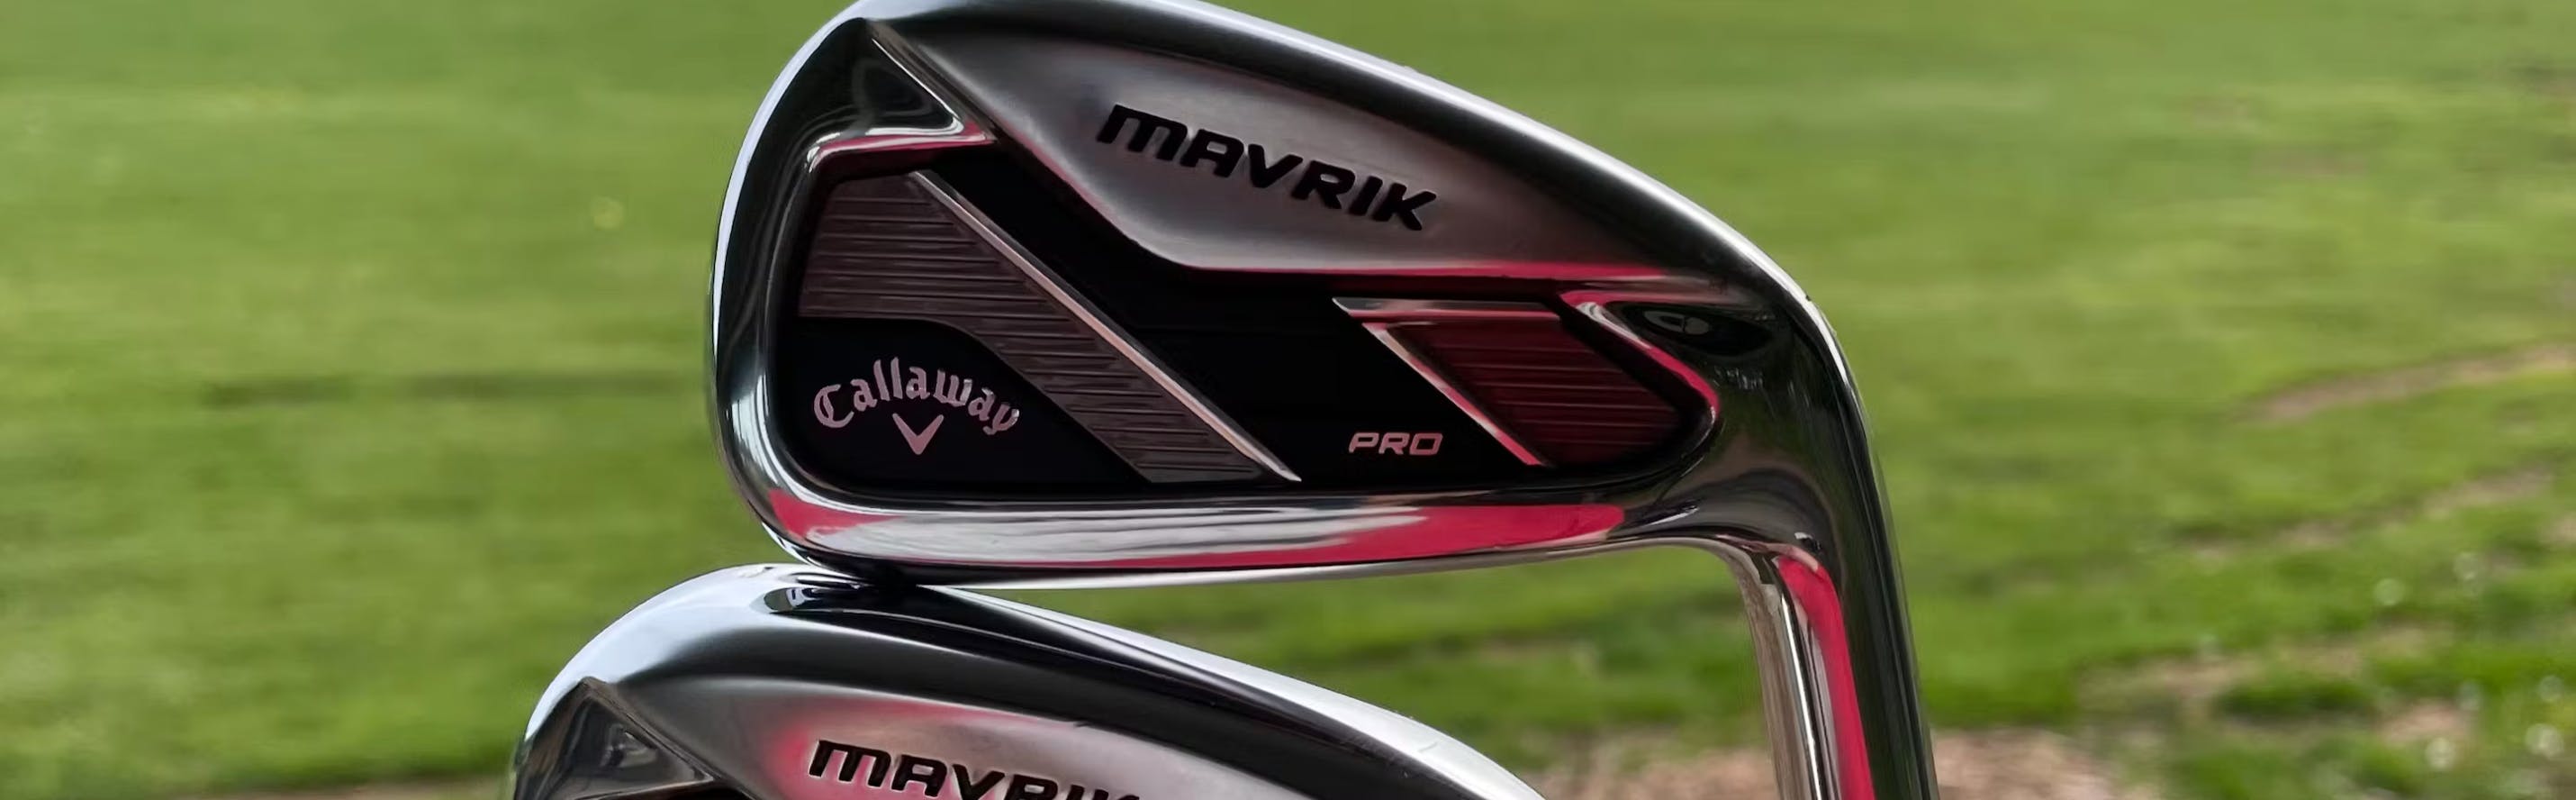 The Best Features of Callaway Mavrik Irons | Curated.com